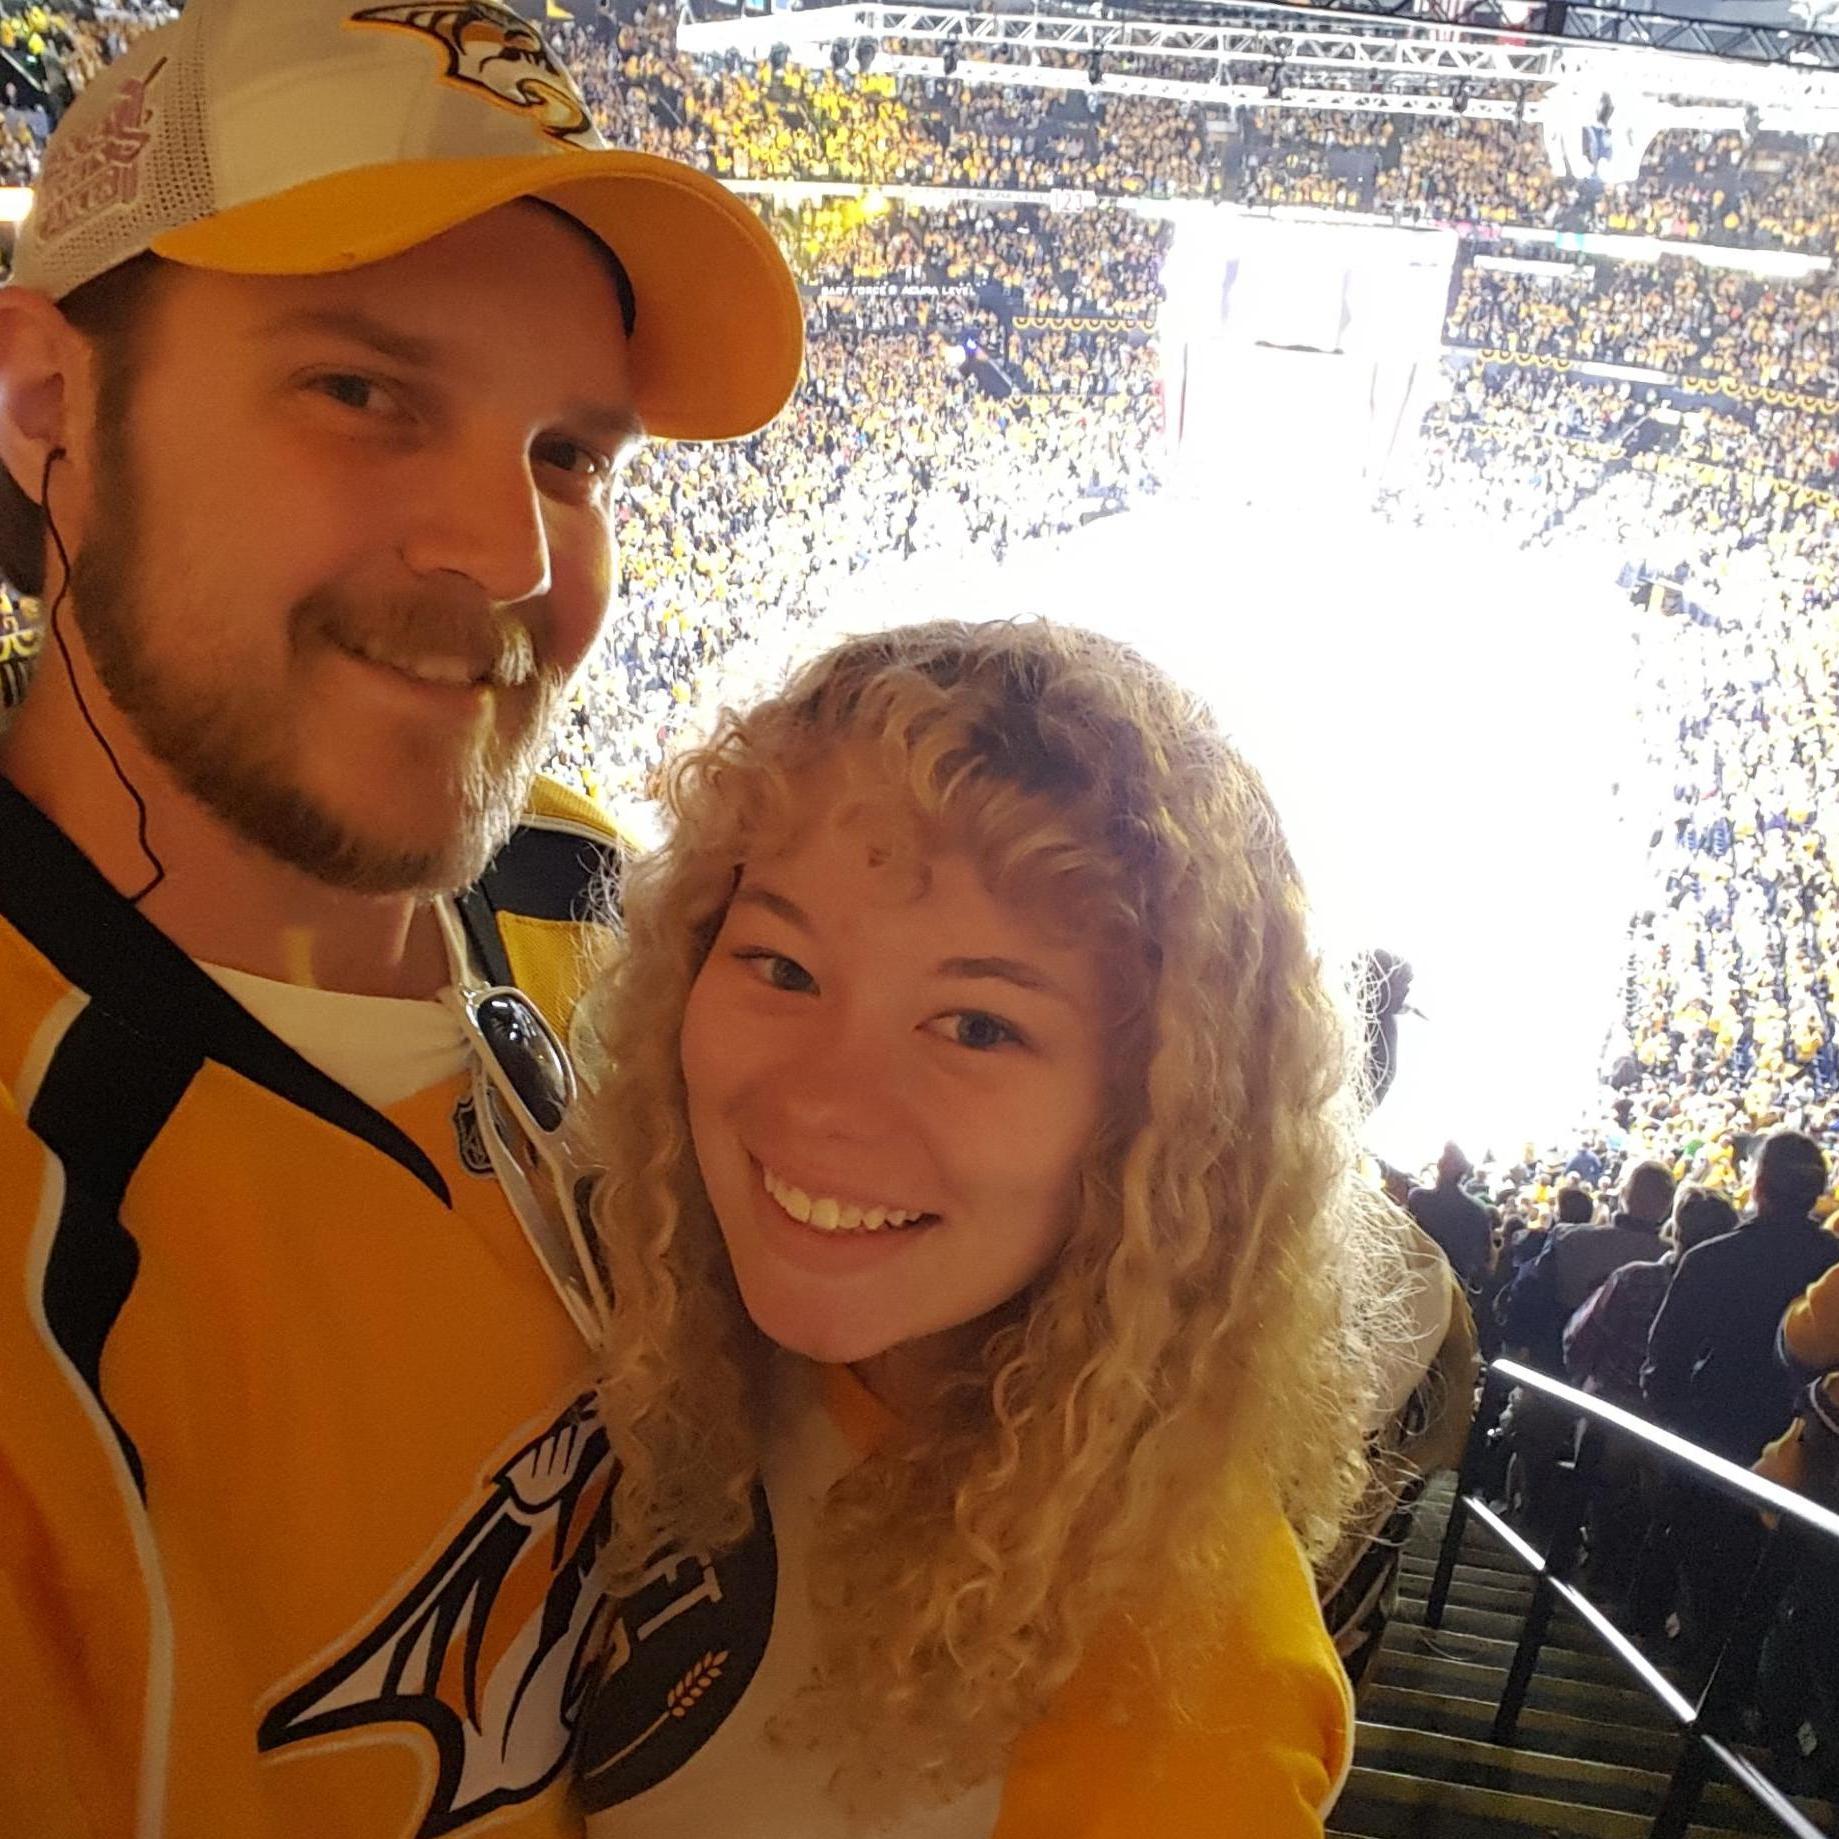 our first Predators game together